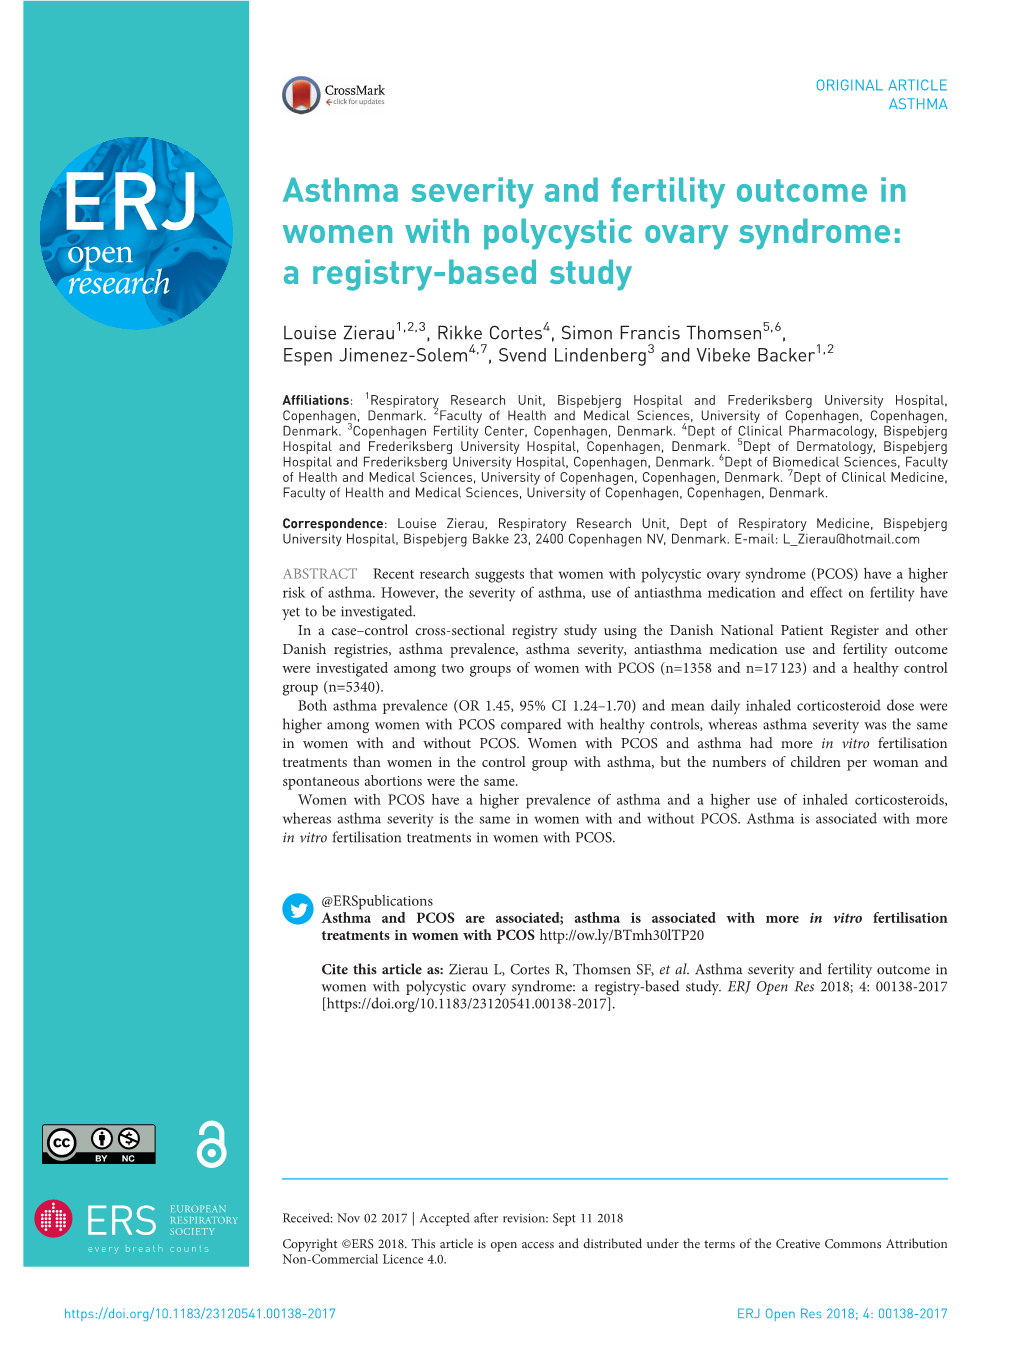 Asthma Severity and Fertility Outcome in Women with Polycystic Ovary Syndrome: a Registry-Based Study